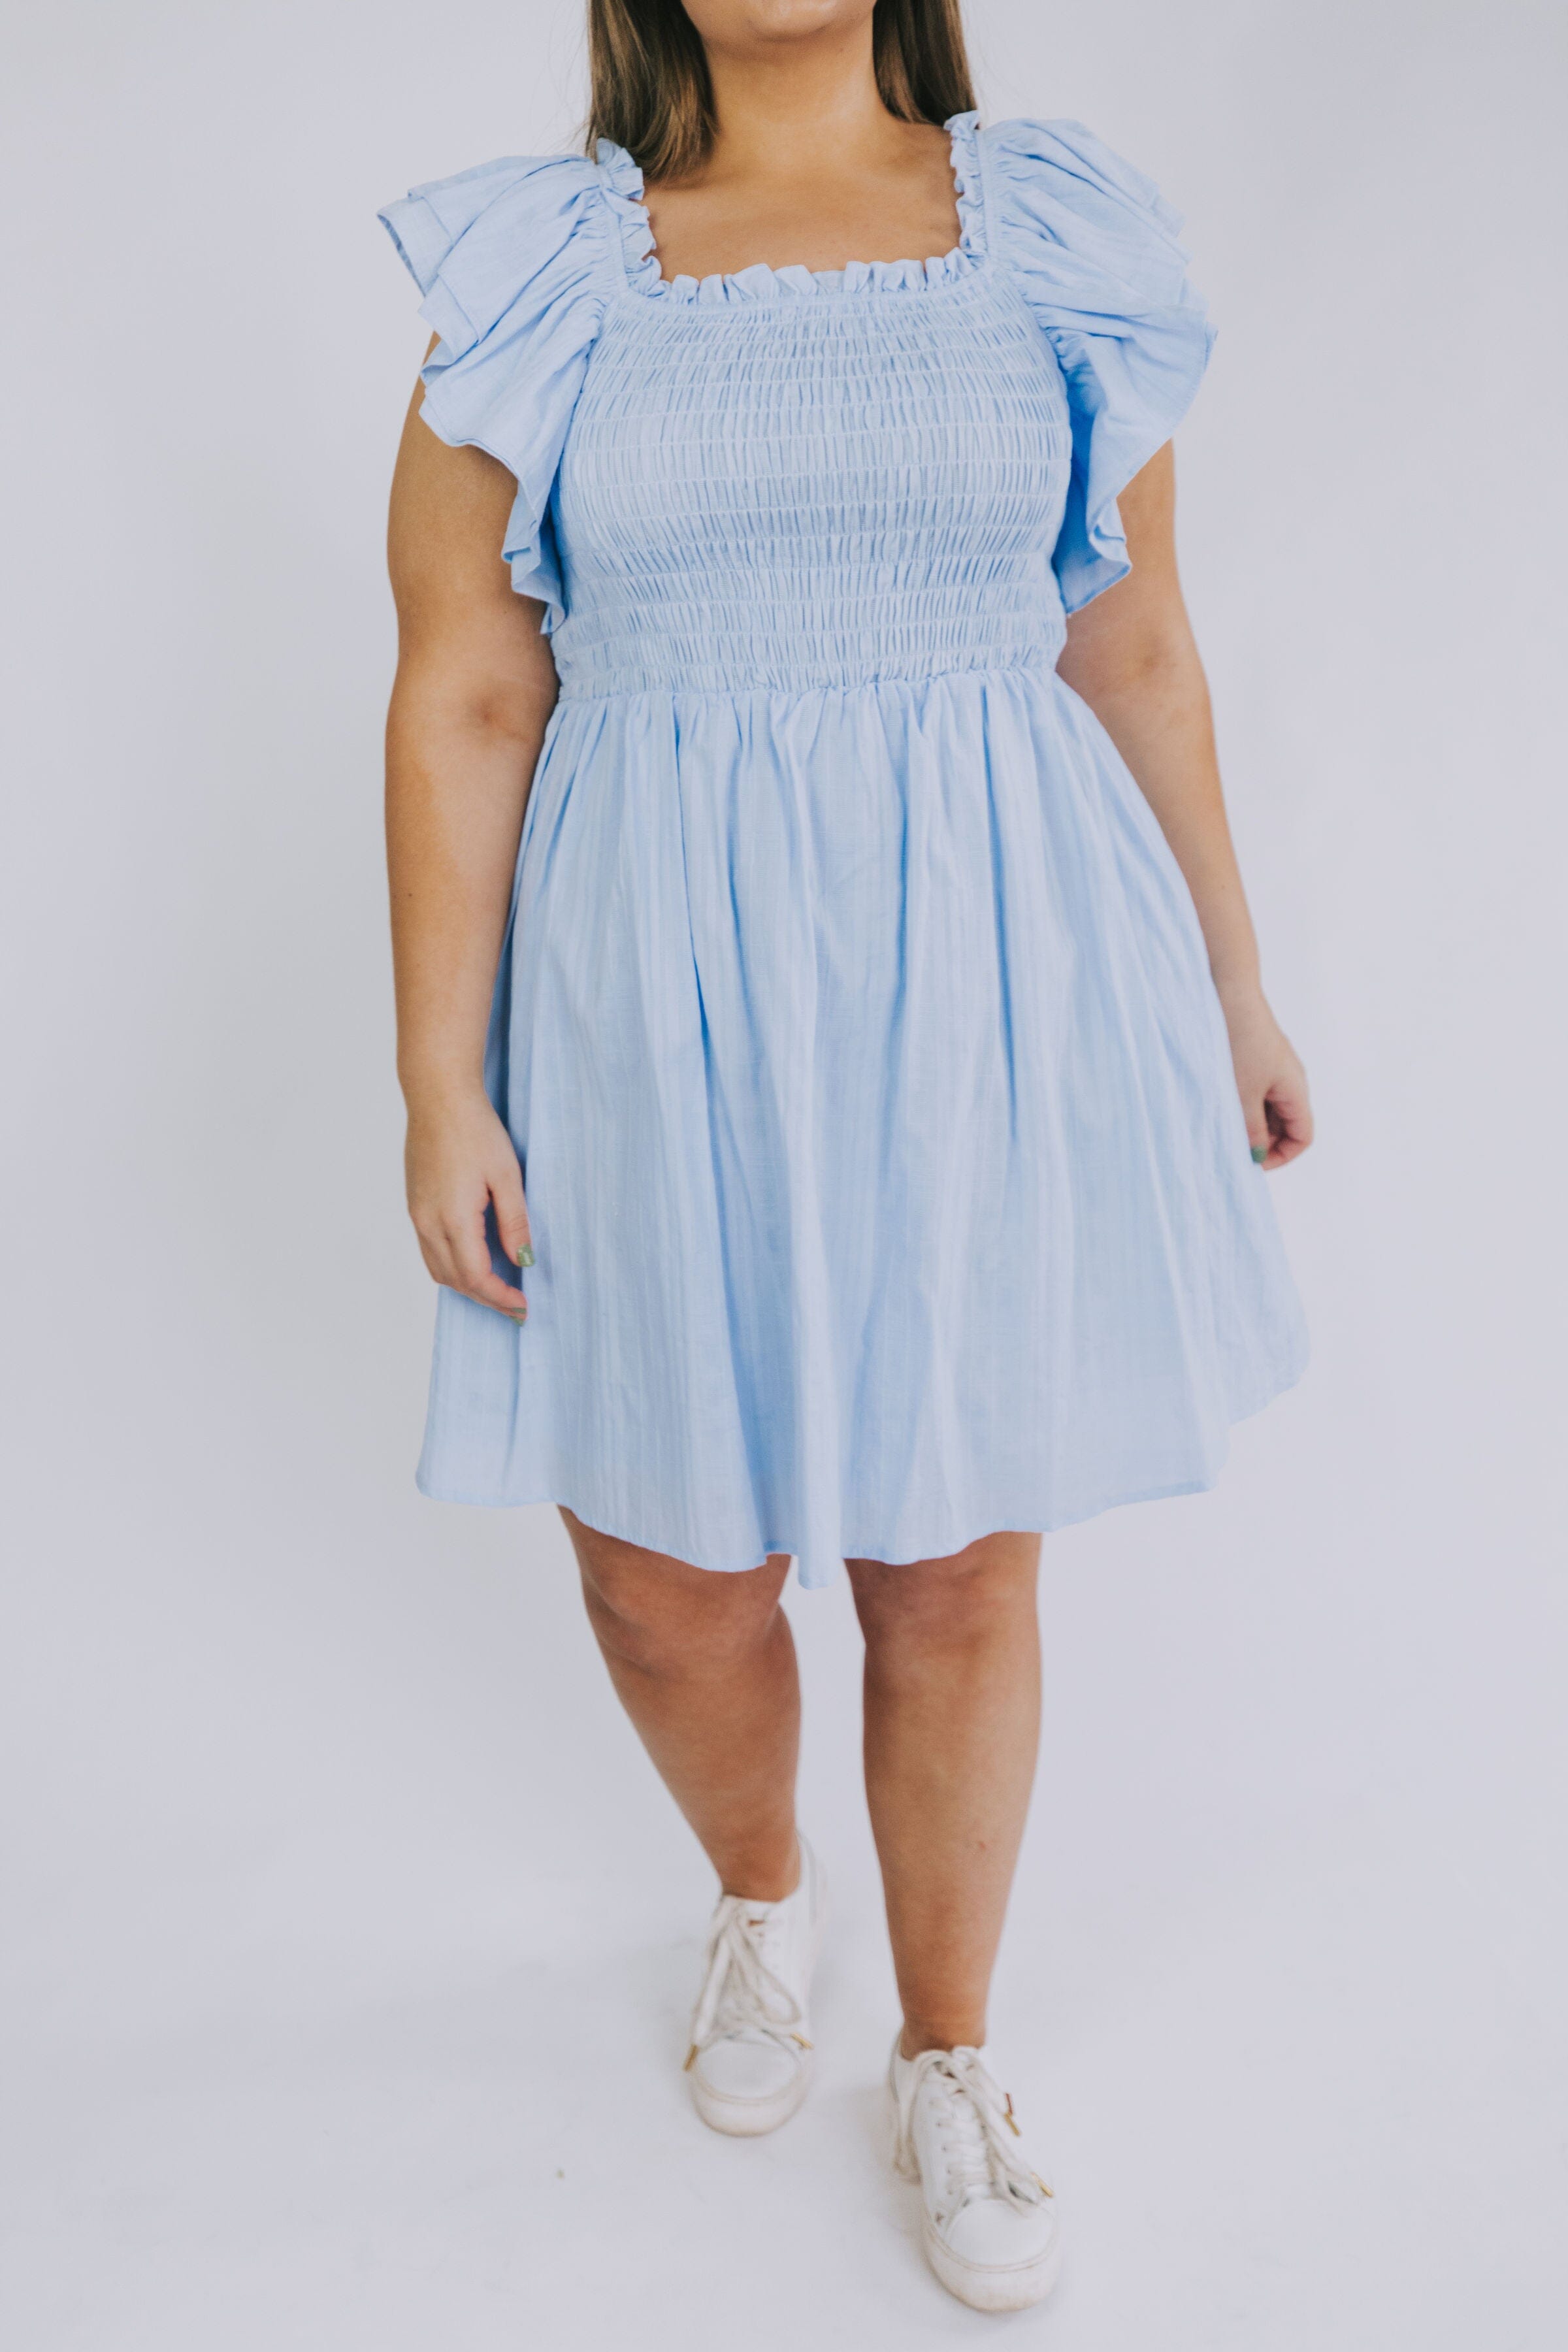 PLUS SIZE - Look At You Dress